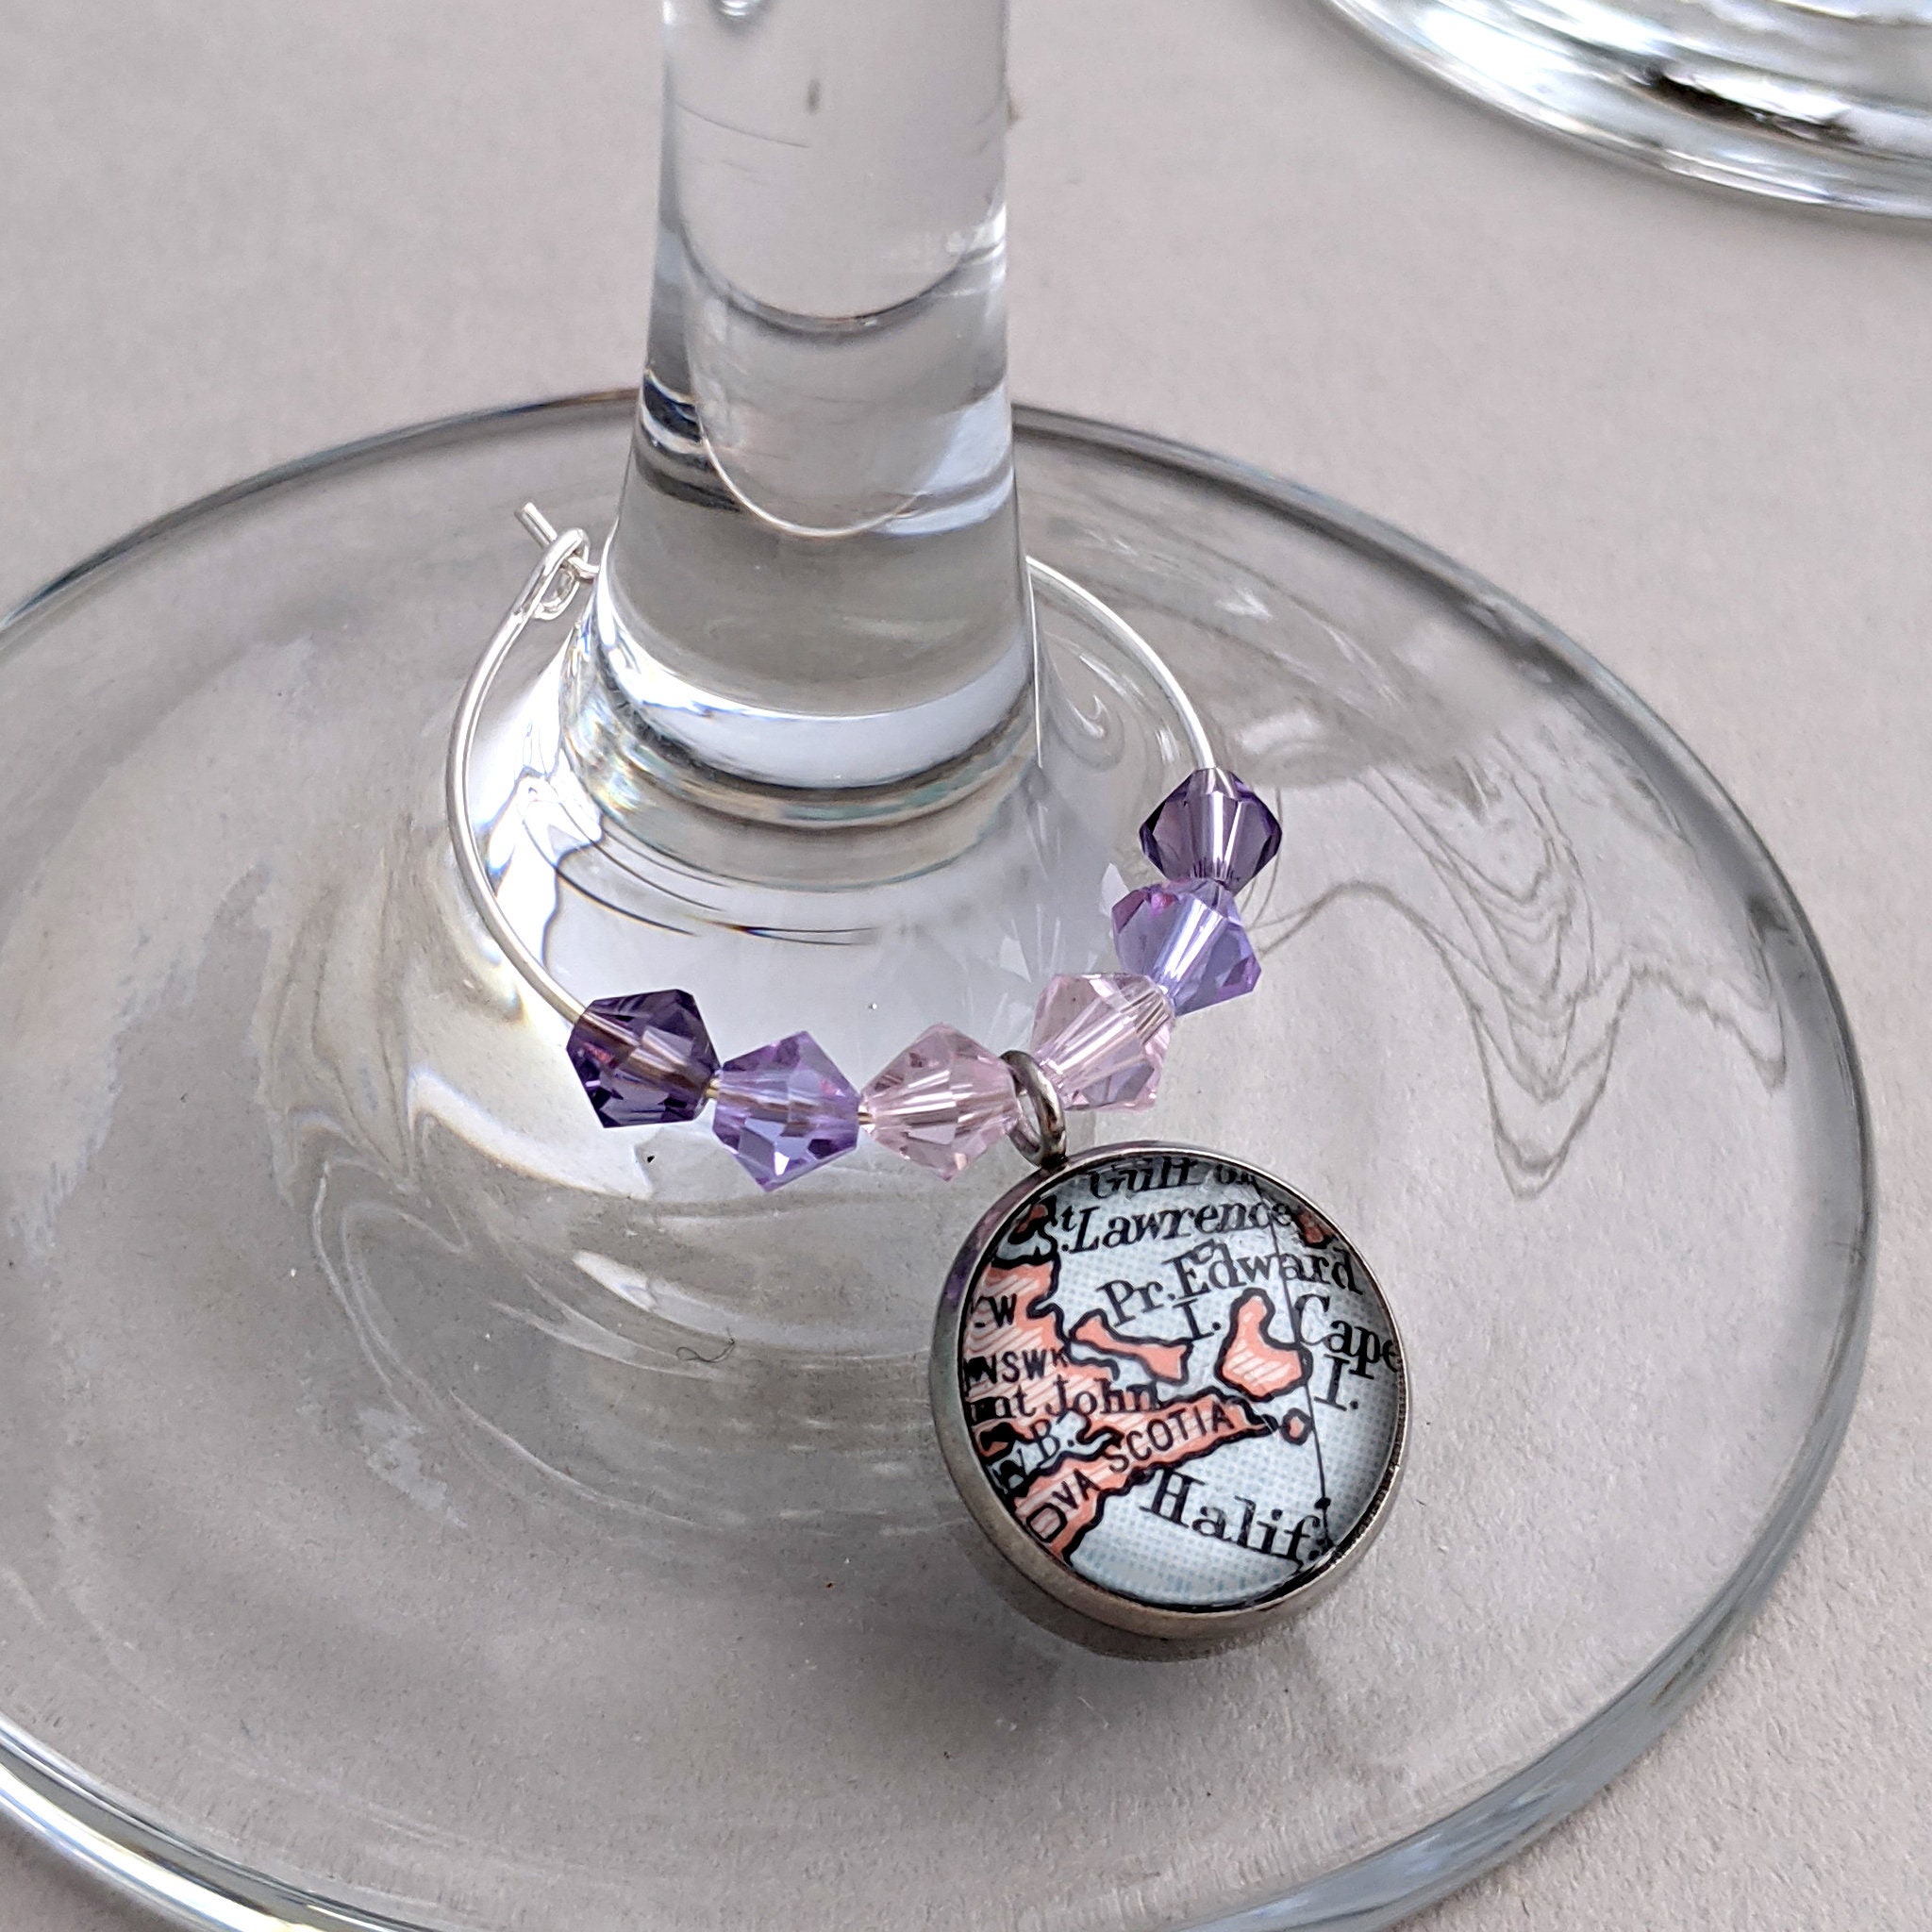 How to Make Easy, Custom, Personalized DIY Wine Glass Charms